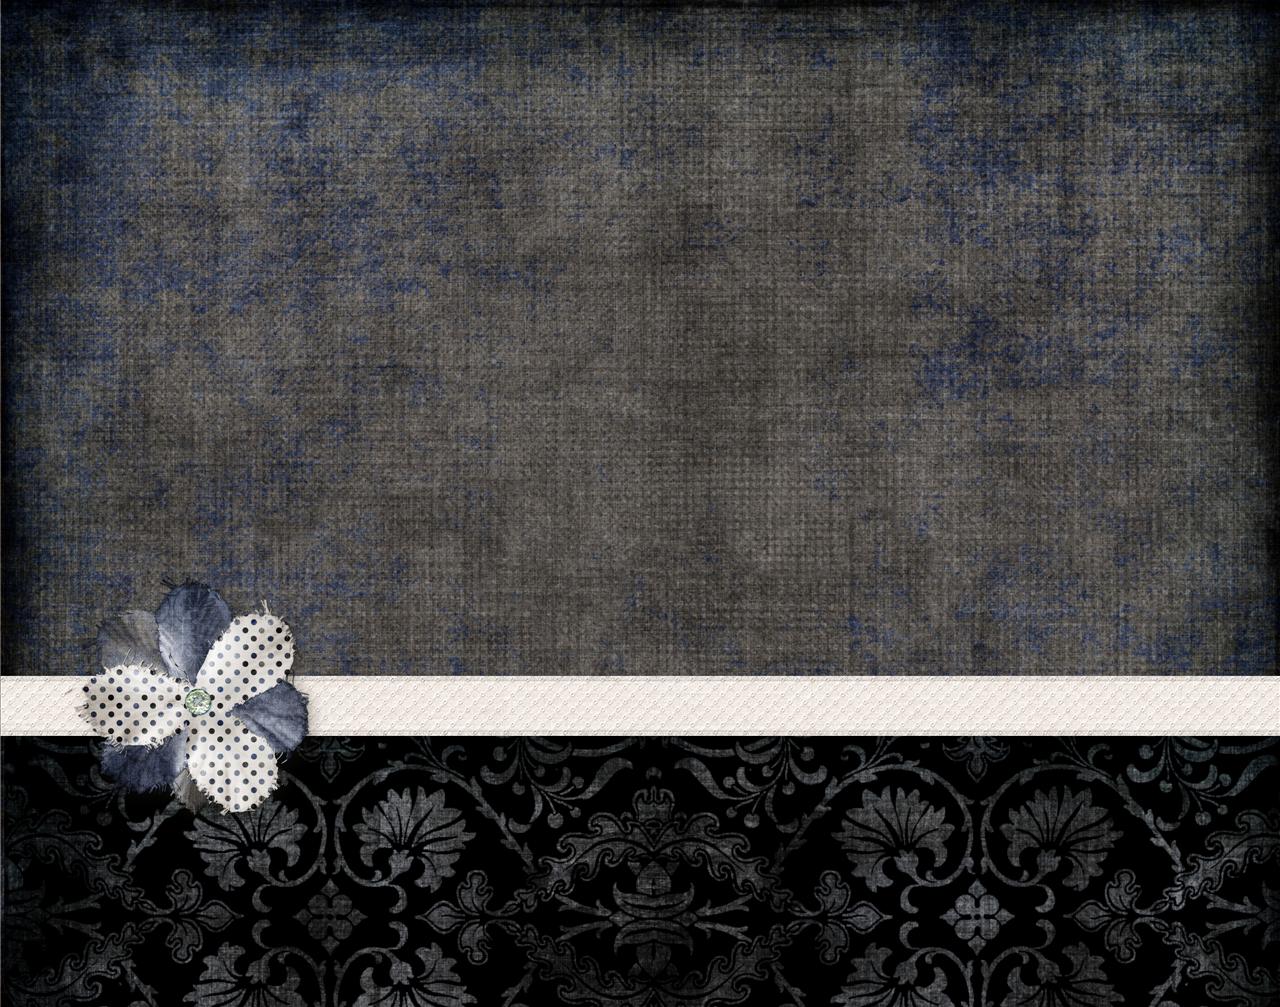 Flower with Borders Backgrounds